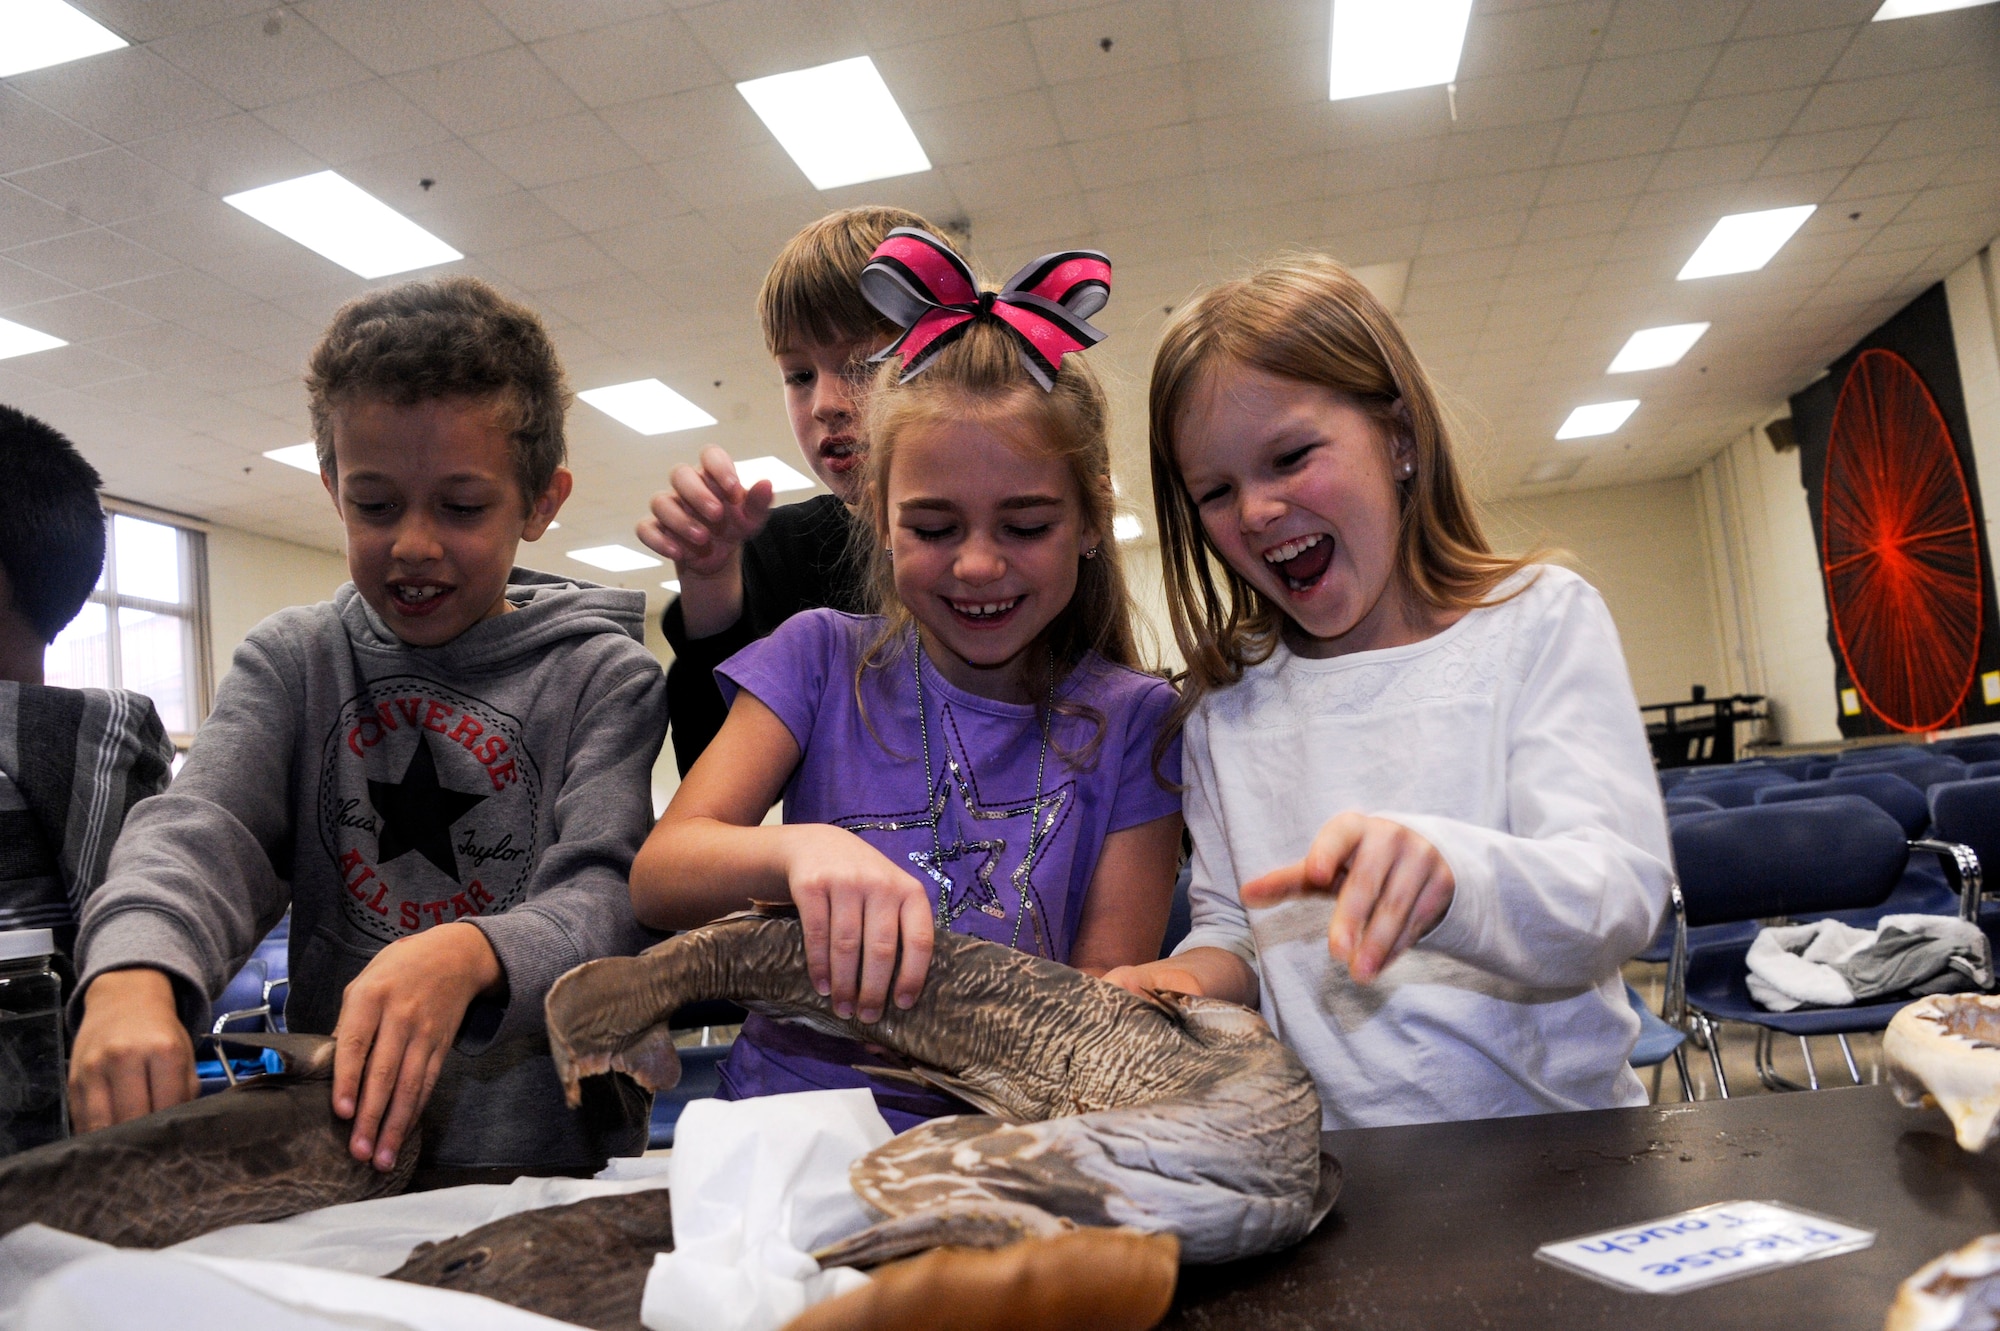 Gwyneth Dotzlaf, left, and Janna Westlake, right, Maxwell Elementary/Middle School second graders, pick up a preserved Bonnethead shark during the Dauphin Island Sea Lab’s BayMobile event Jan. 26, 2015, at Maxwell Elementary/Middle School, Maxwell Air Force Base, Alabama.  The Bonnethead shark is characterized by their broad, smooth head and reaches about 2 -3 feet in length. Bonnethead shark is native to the warmer waters of the Western Hemisphere from New England to the Gulf of Mexico and Southern California to Ecuador. (U.S. Air Force photo by Airman 1st Class Alexa Culbert)